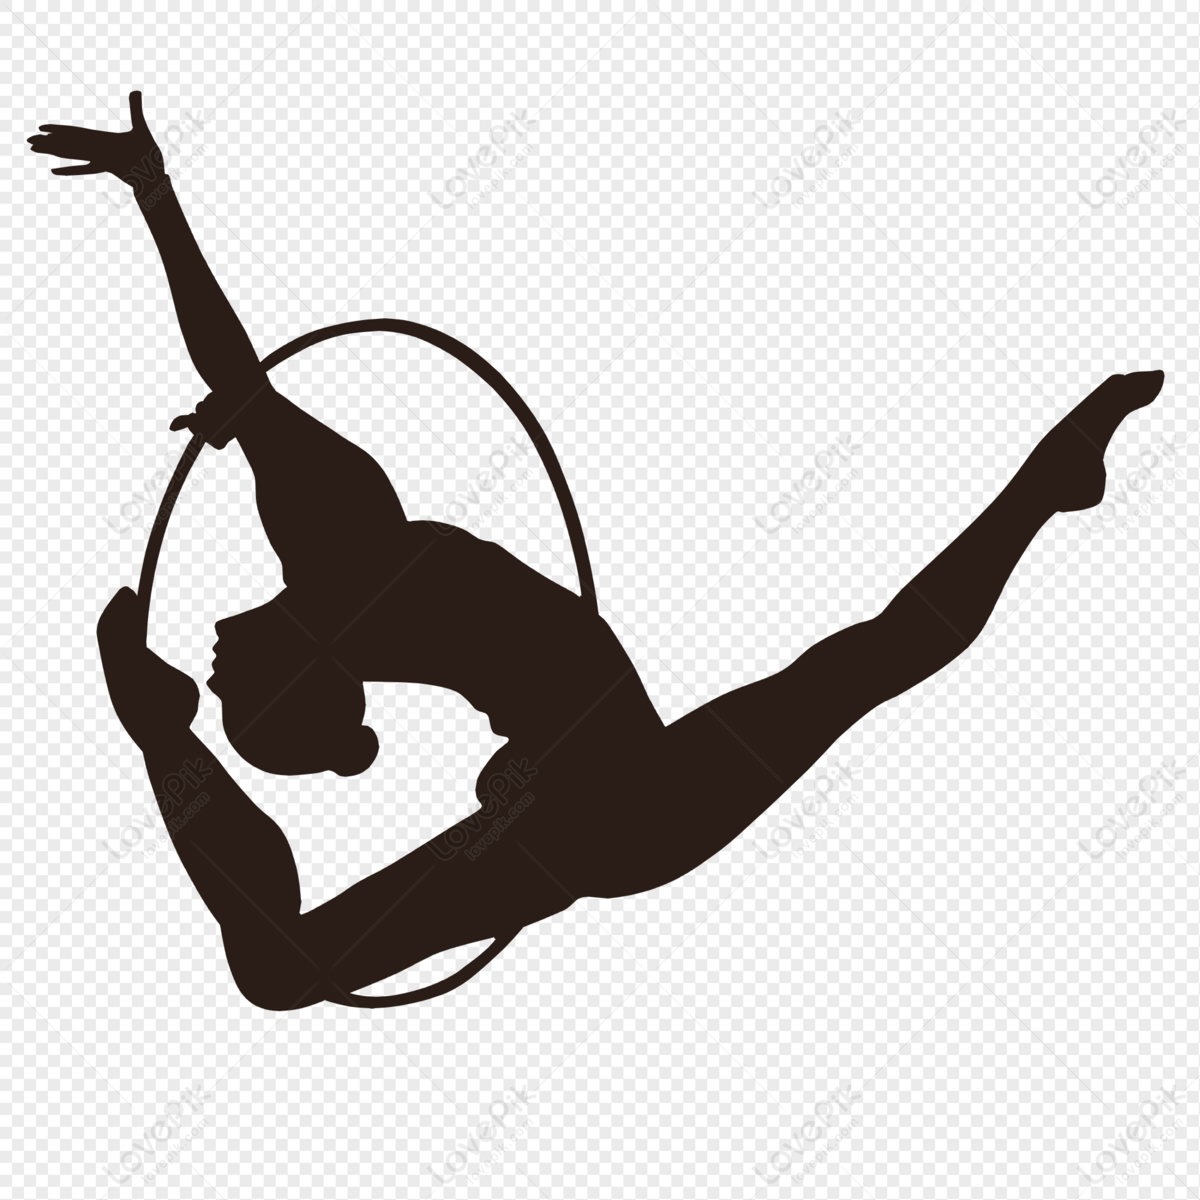 Gymnastic Female Athlete Silhouette, Athletes, Athlete Silhouettes, Female  Silhouette PNG Hd Transparent Image And Clipart Image For Free Download -  Lovepik